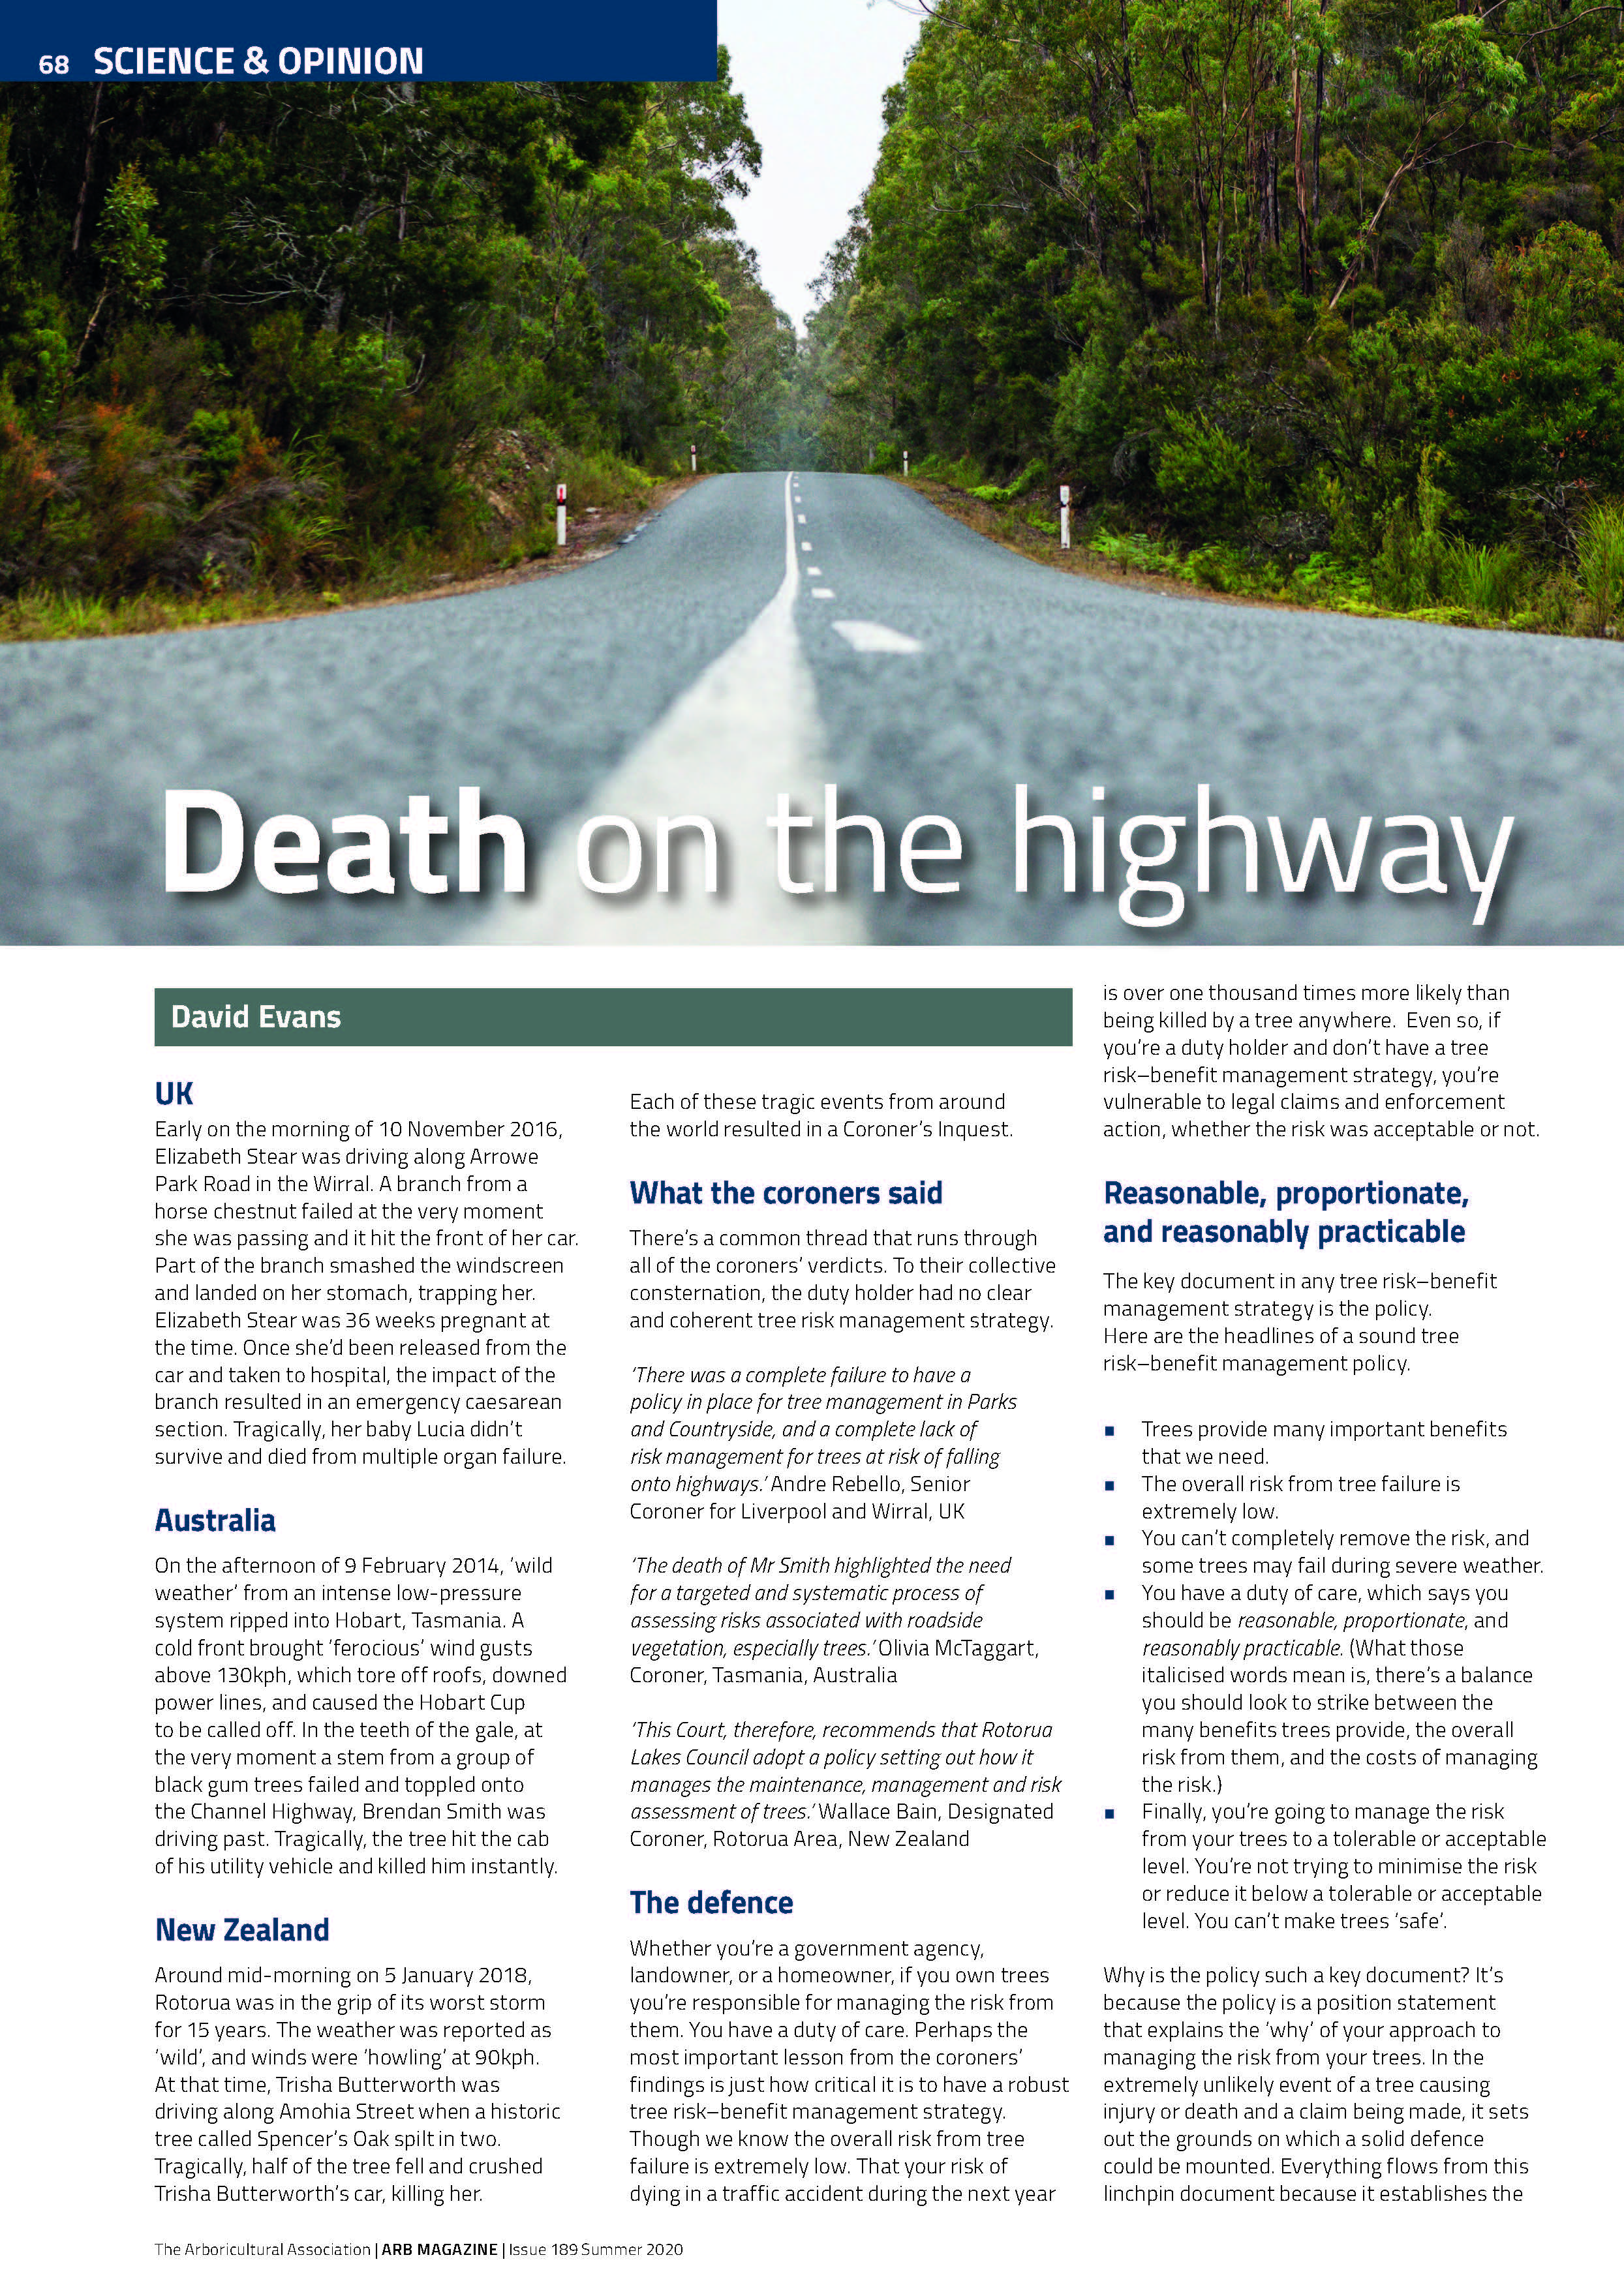 First page of article of tree risk management on the highway